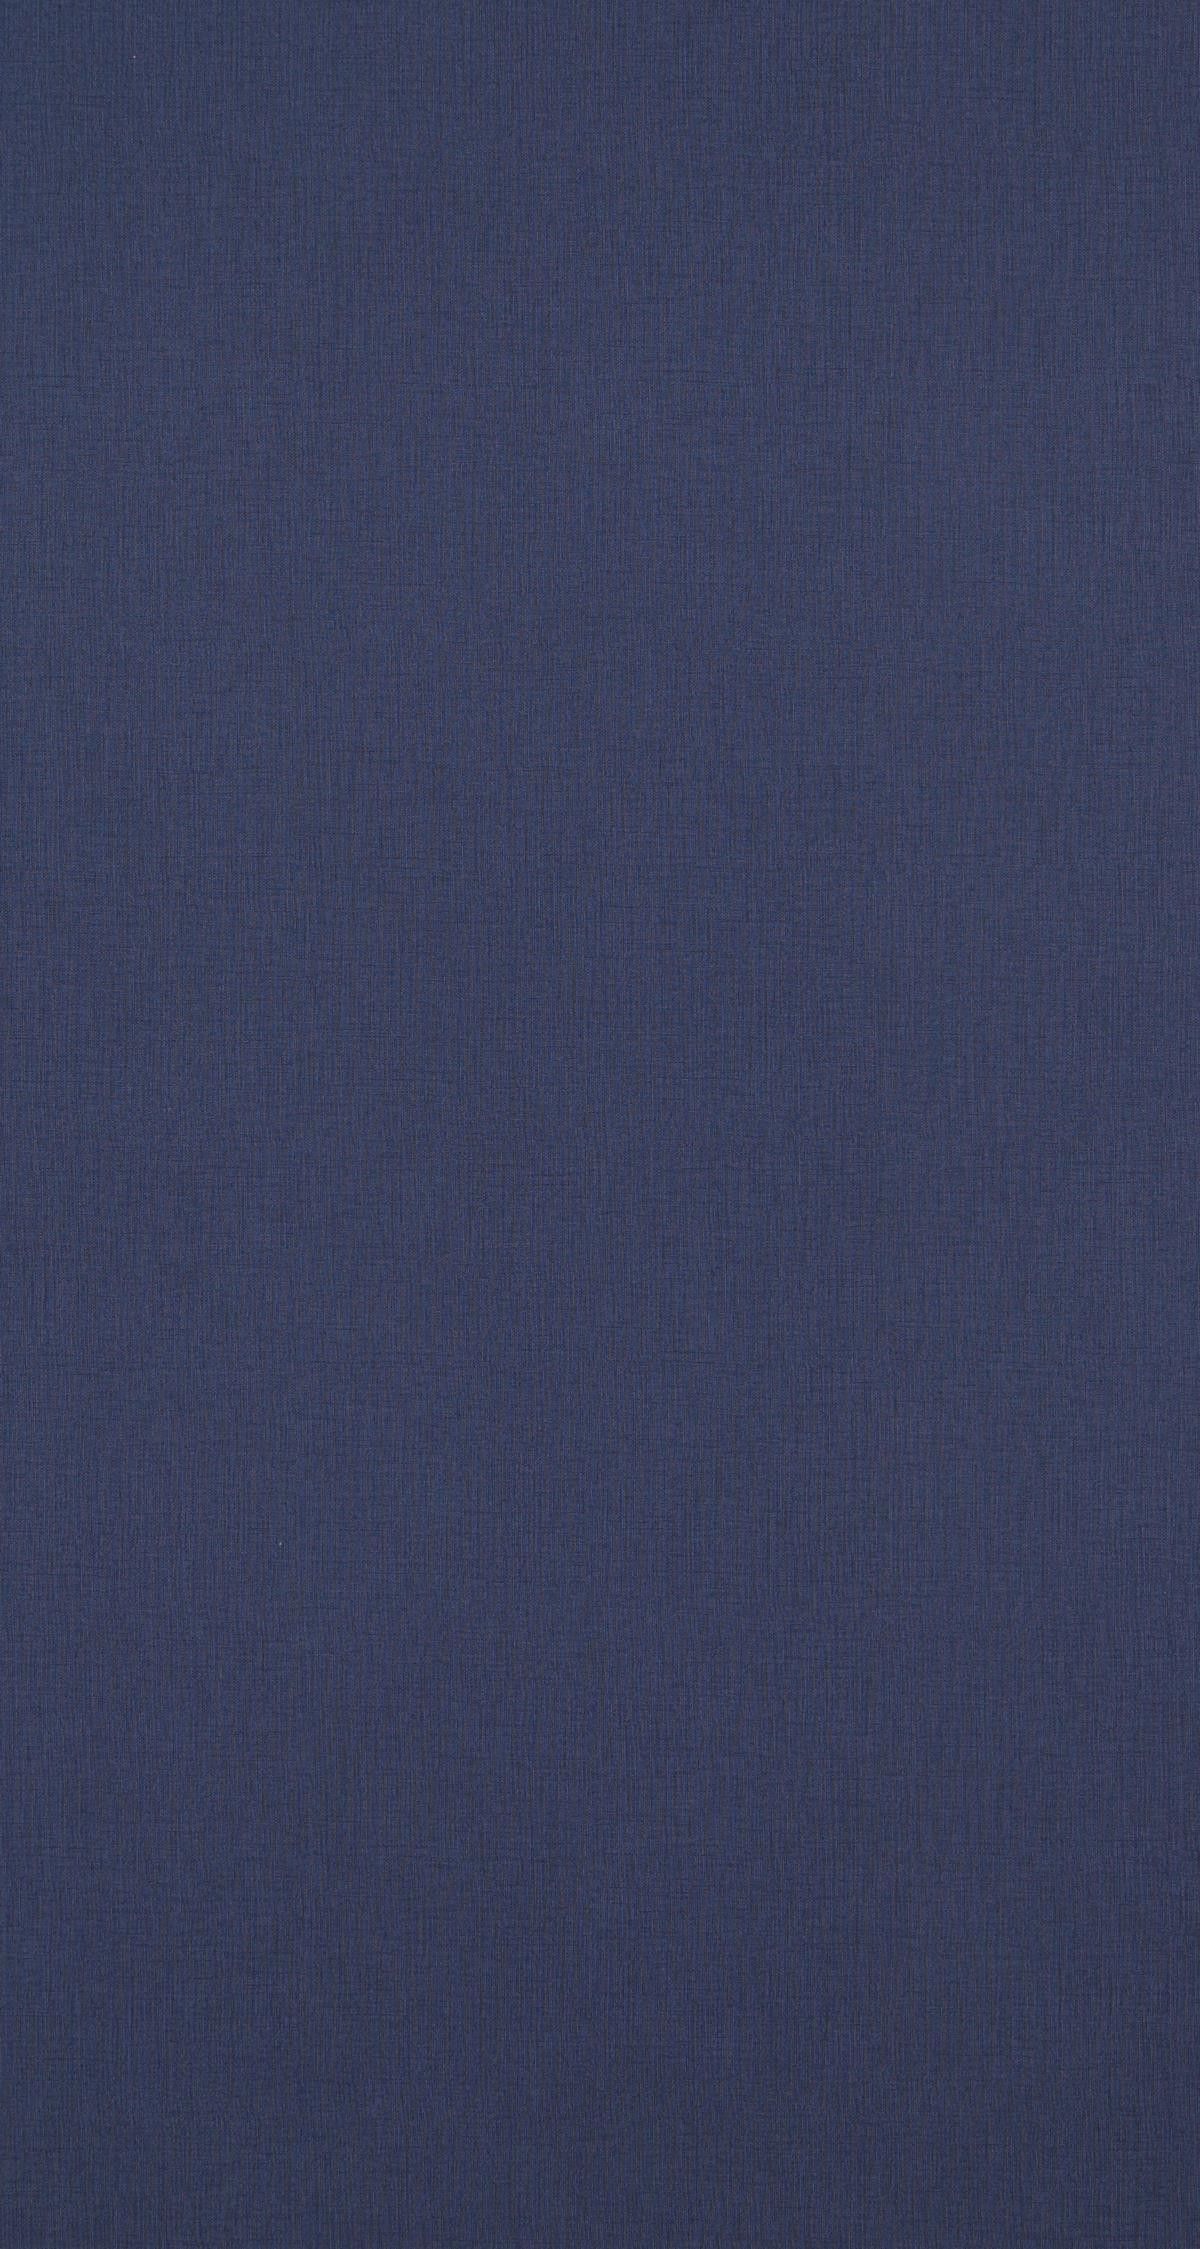 iPhone 7 Solid Blue Wallpaper